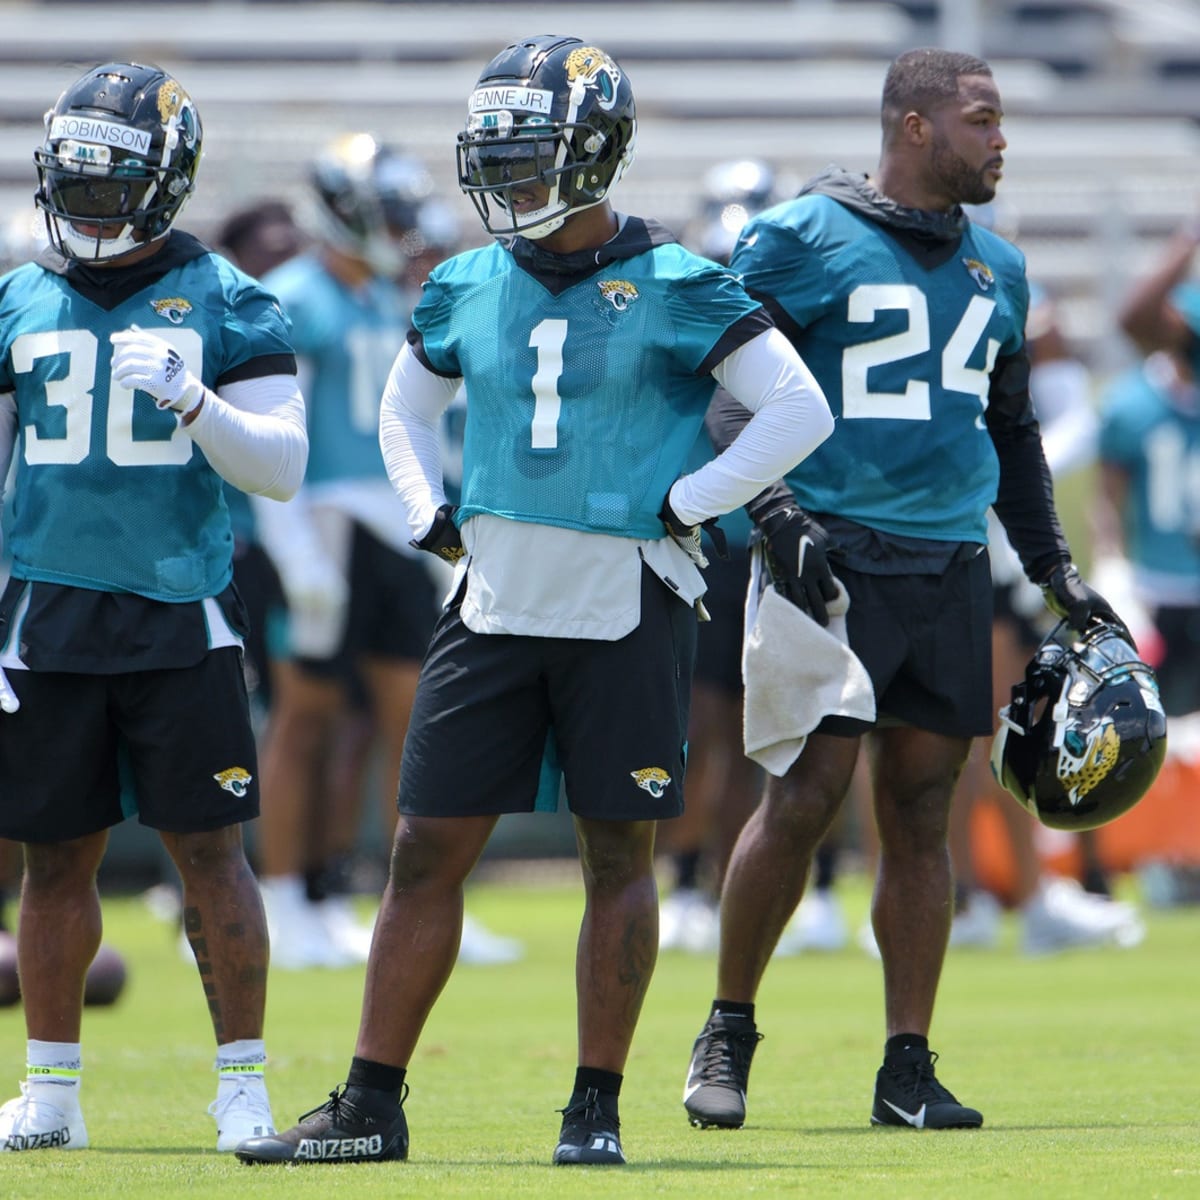 Way-Too-Early Depth Charts: Projecting the Jacksonville Jaguars